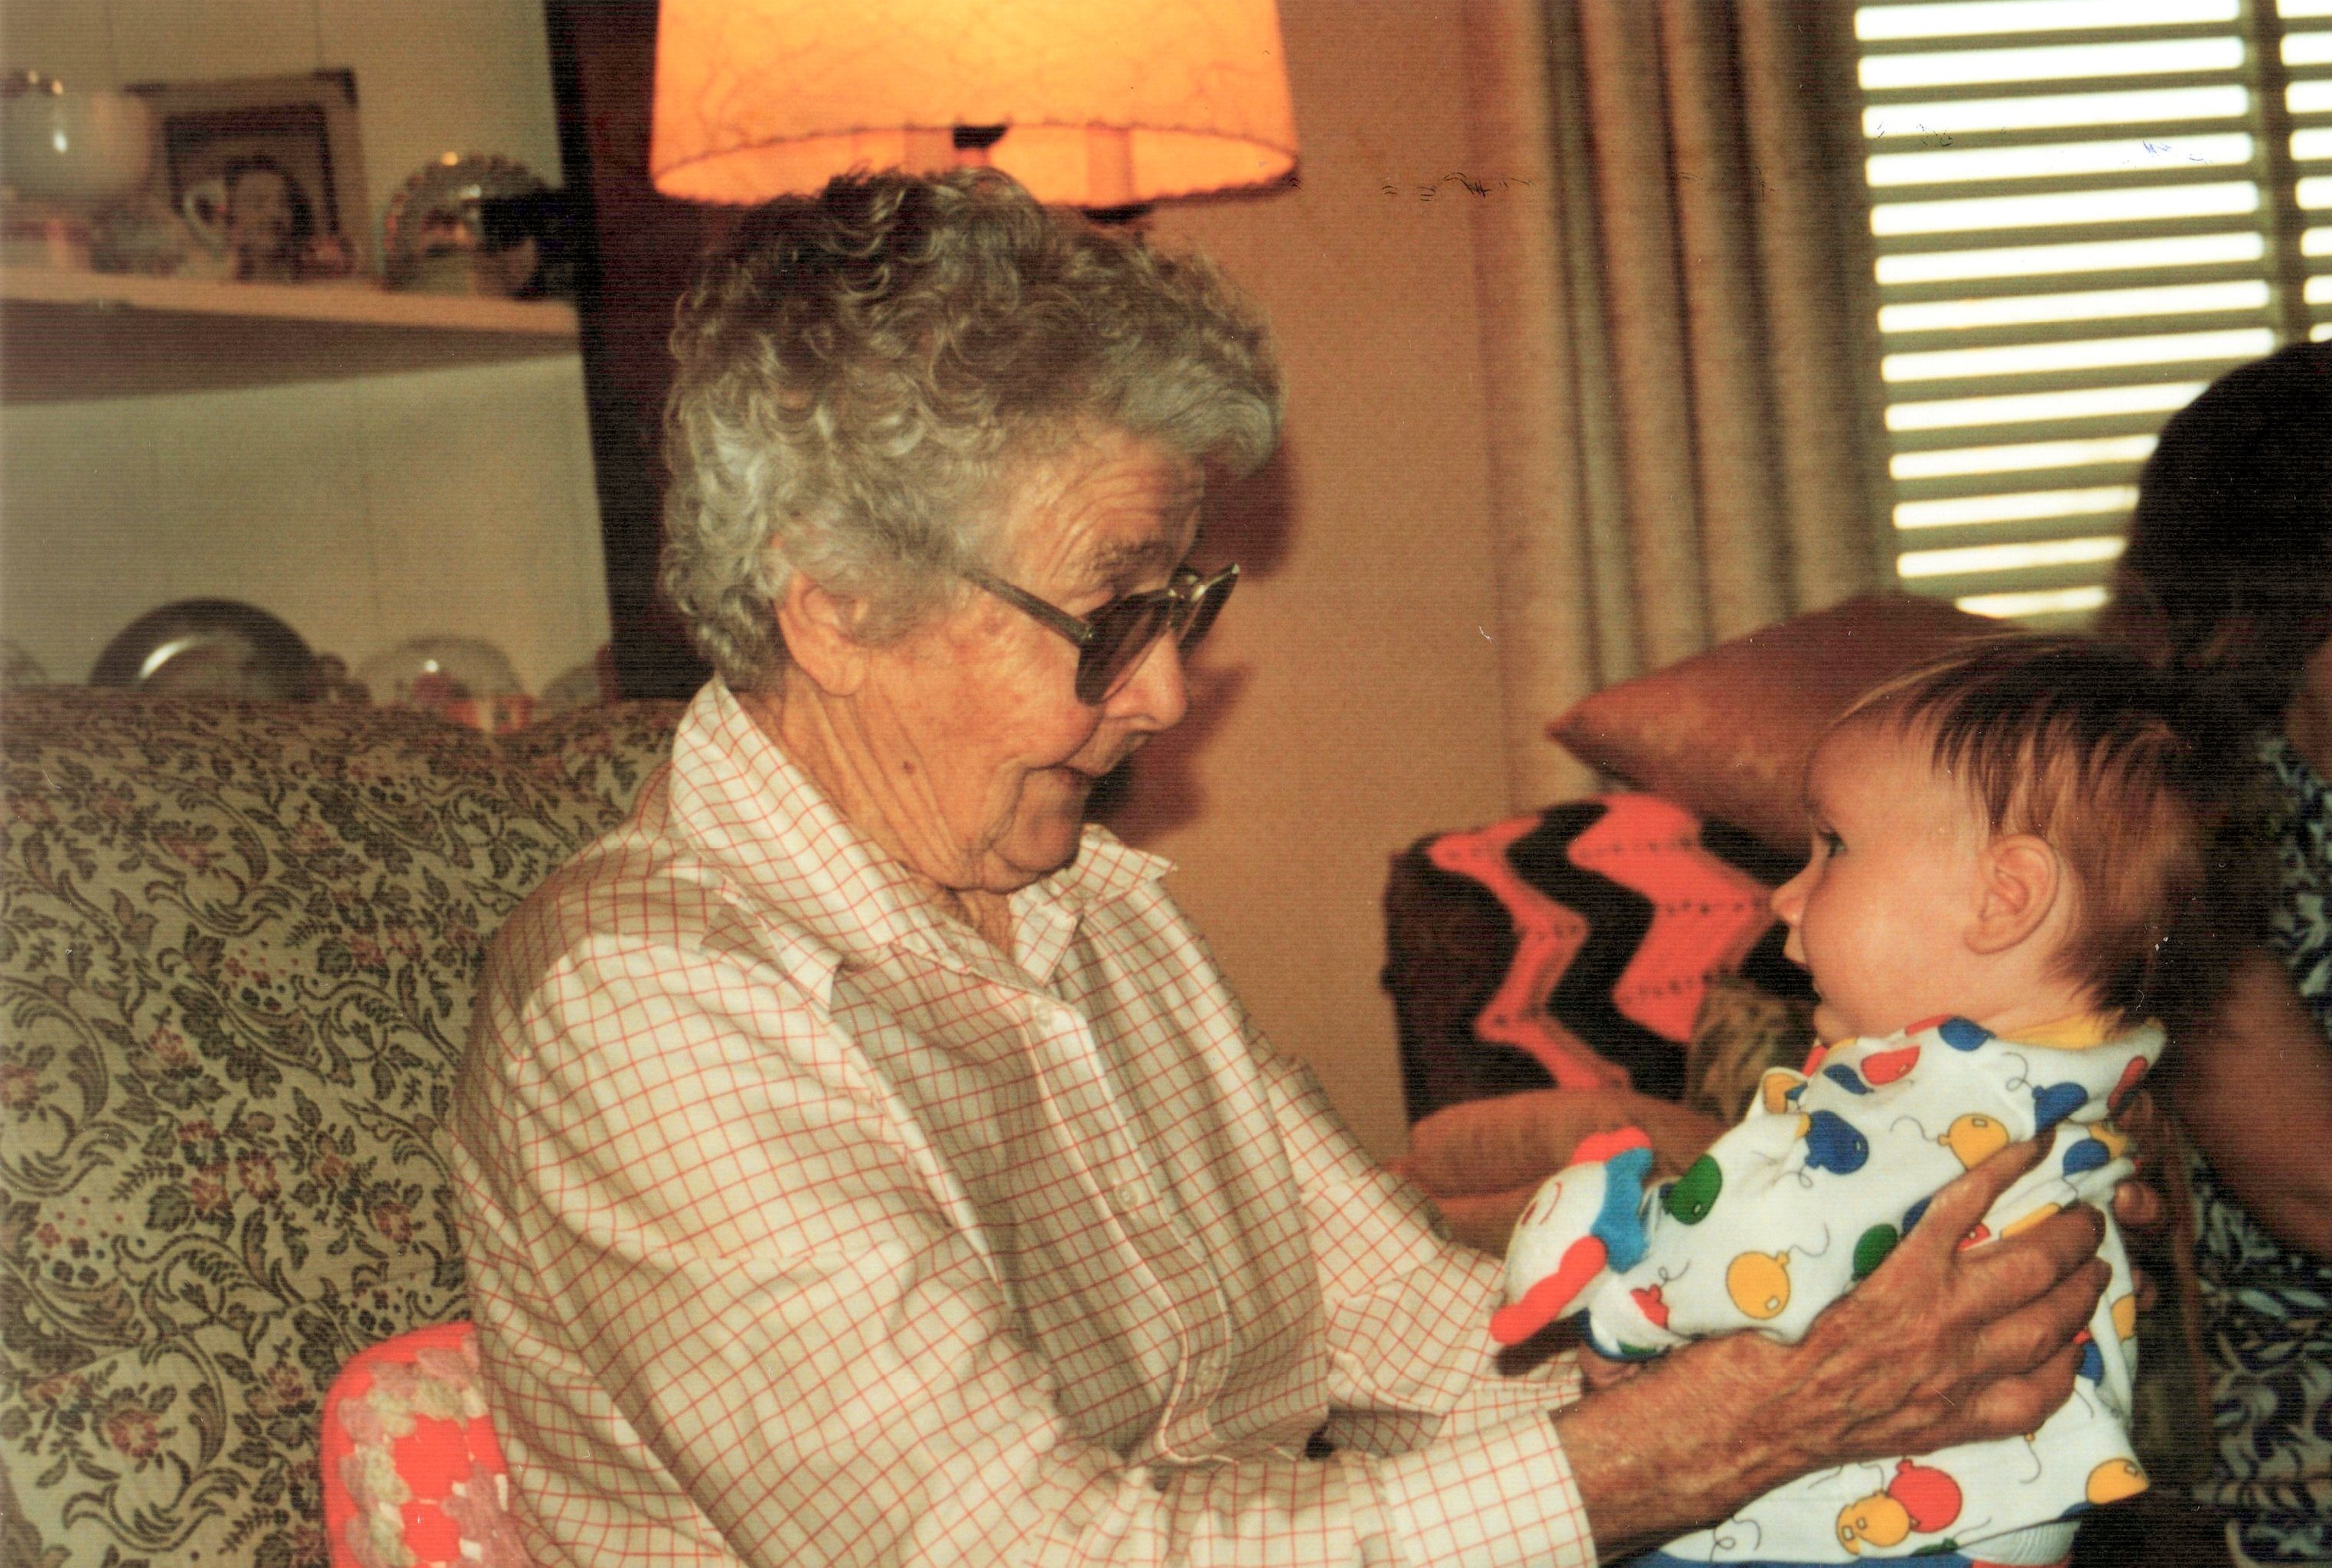 Figure 2: "Aunt Bess holding a young Bryan” by George Jones is licensed under cc by 2.0